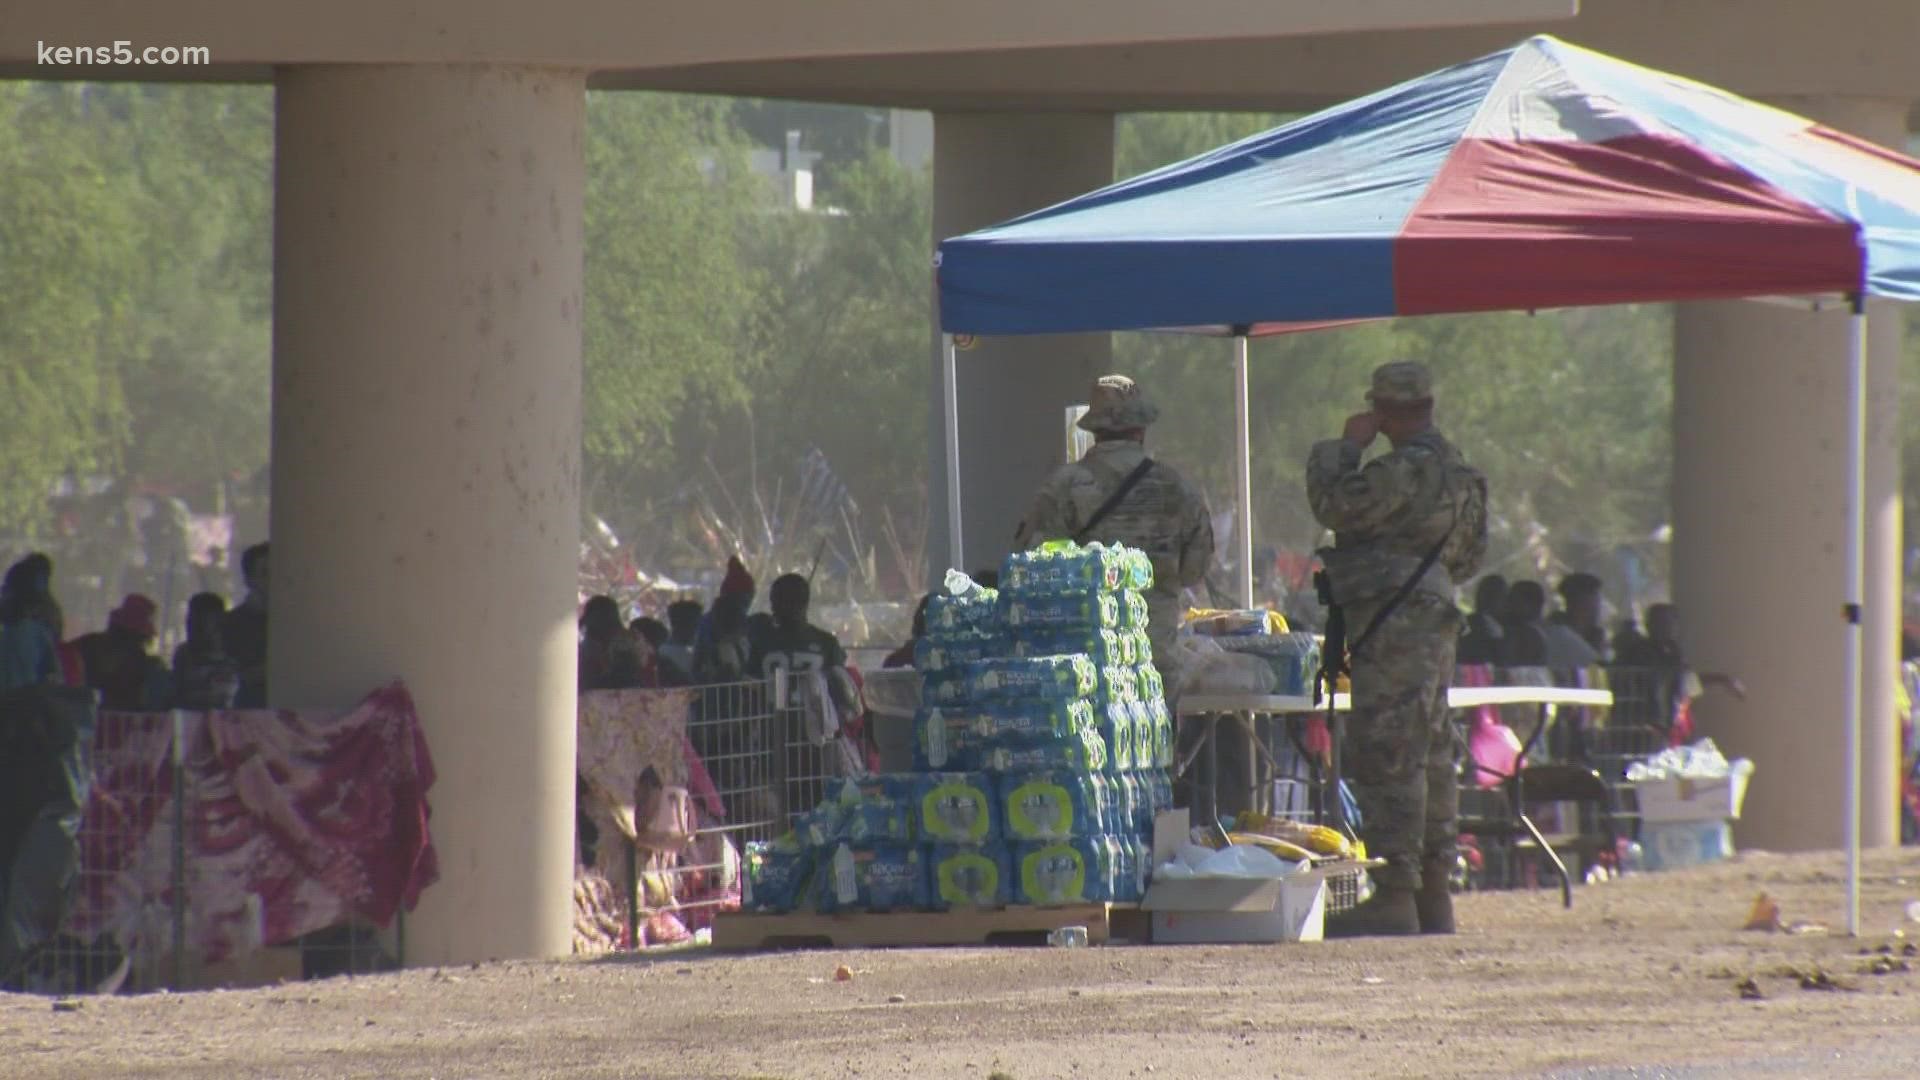 There are more than 15,000 asylum-seeking migrants, and counting, which have arrived in Del Rio in recent weeks.